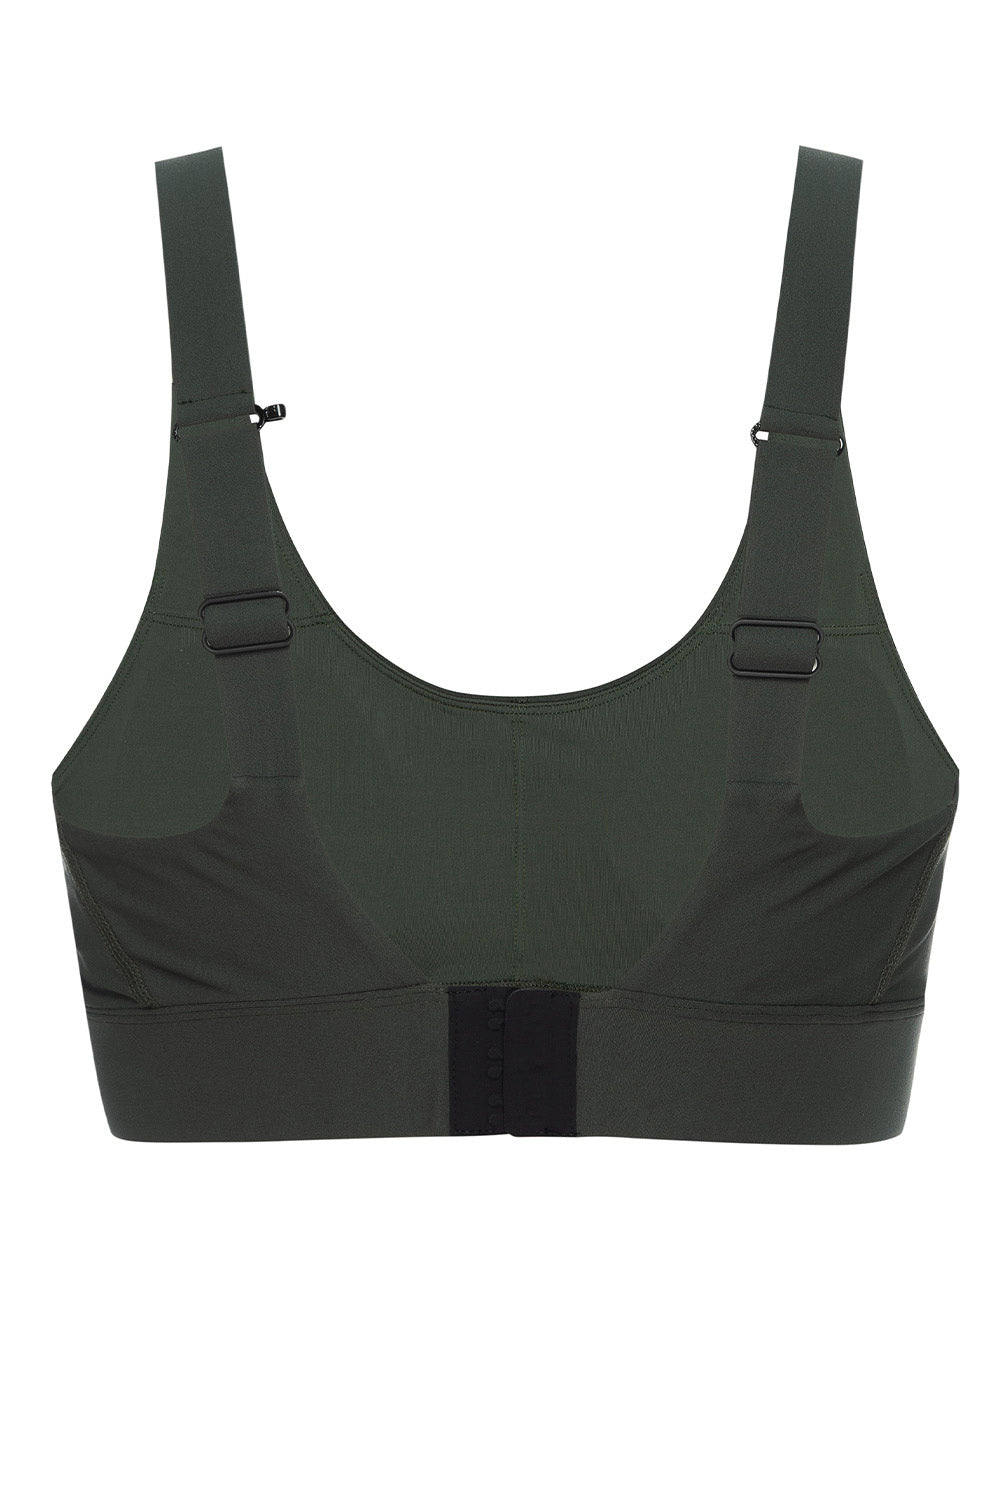 Back view of the Soho dark olive active bra on a white background